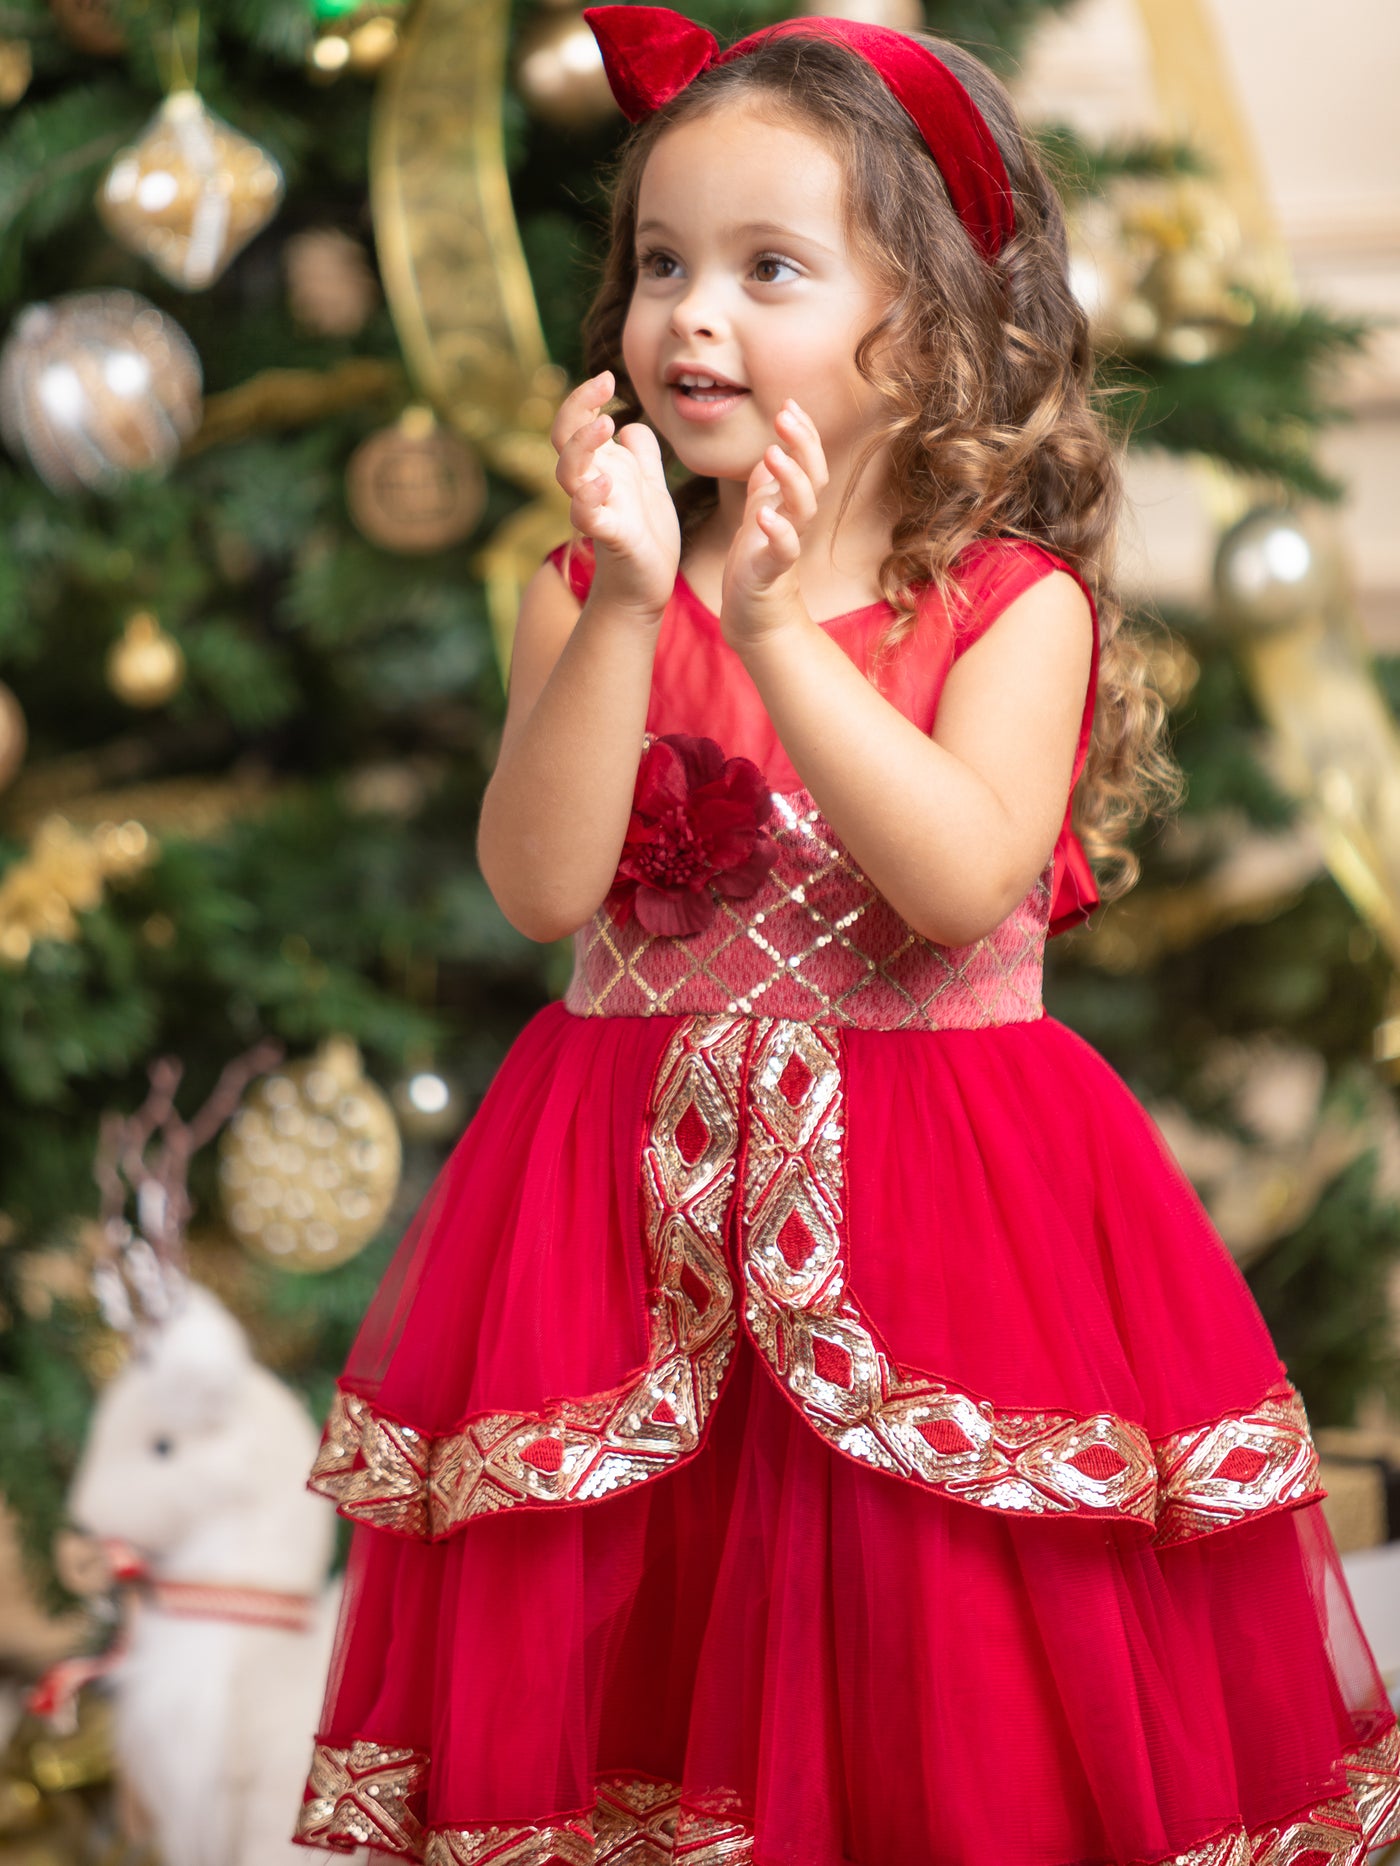 Girls Winter Formal Dress | Tiered Tulle Holiday Dress | Mia Belle Girls